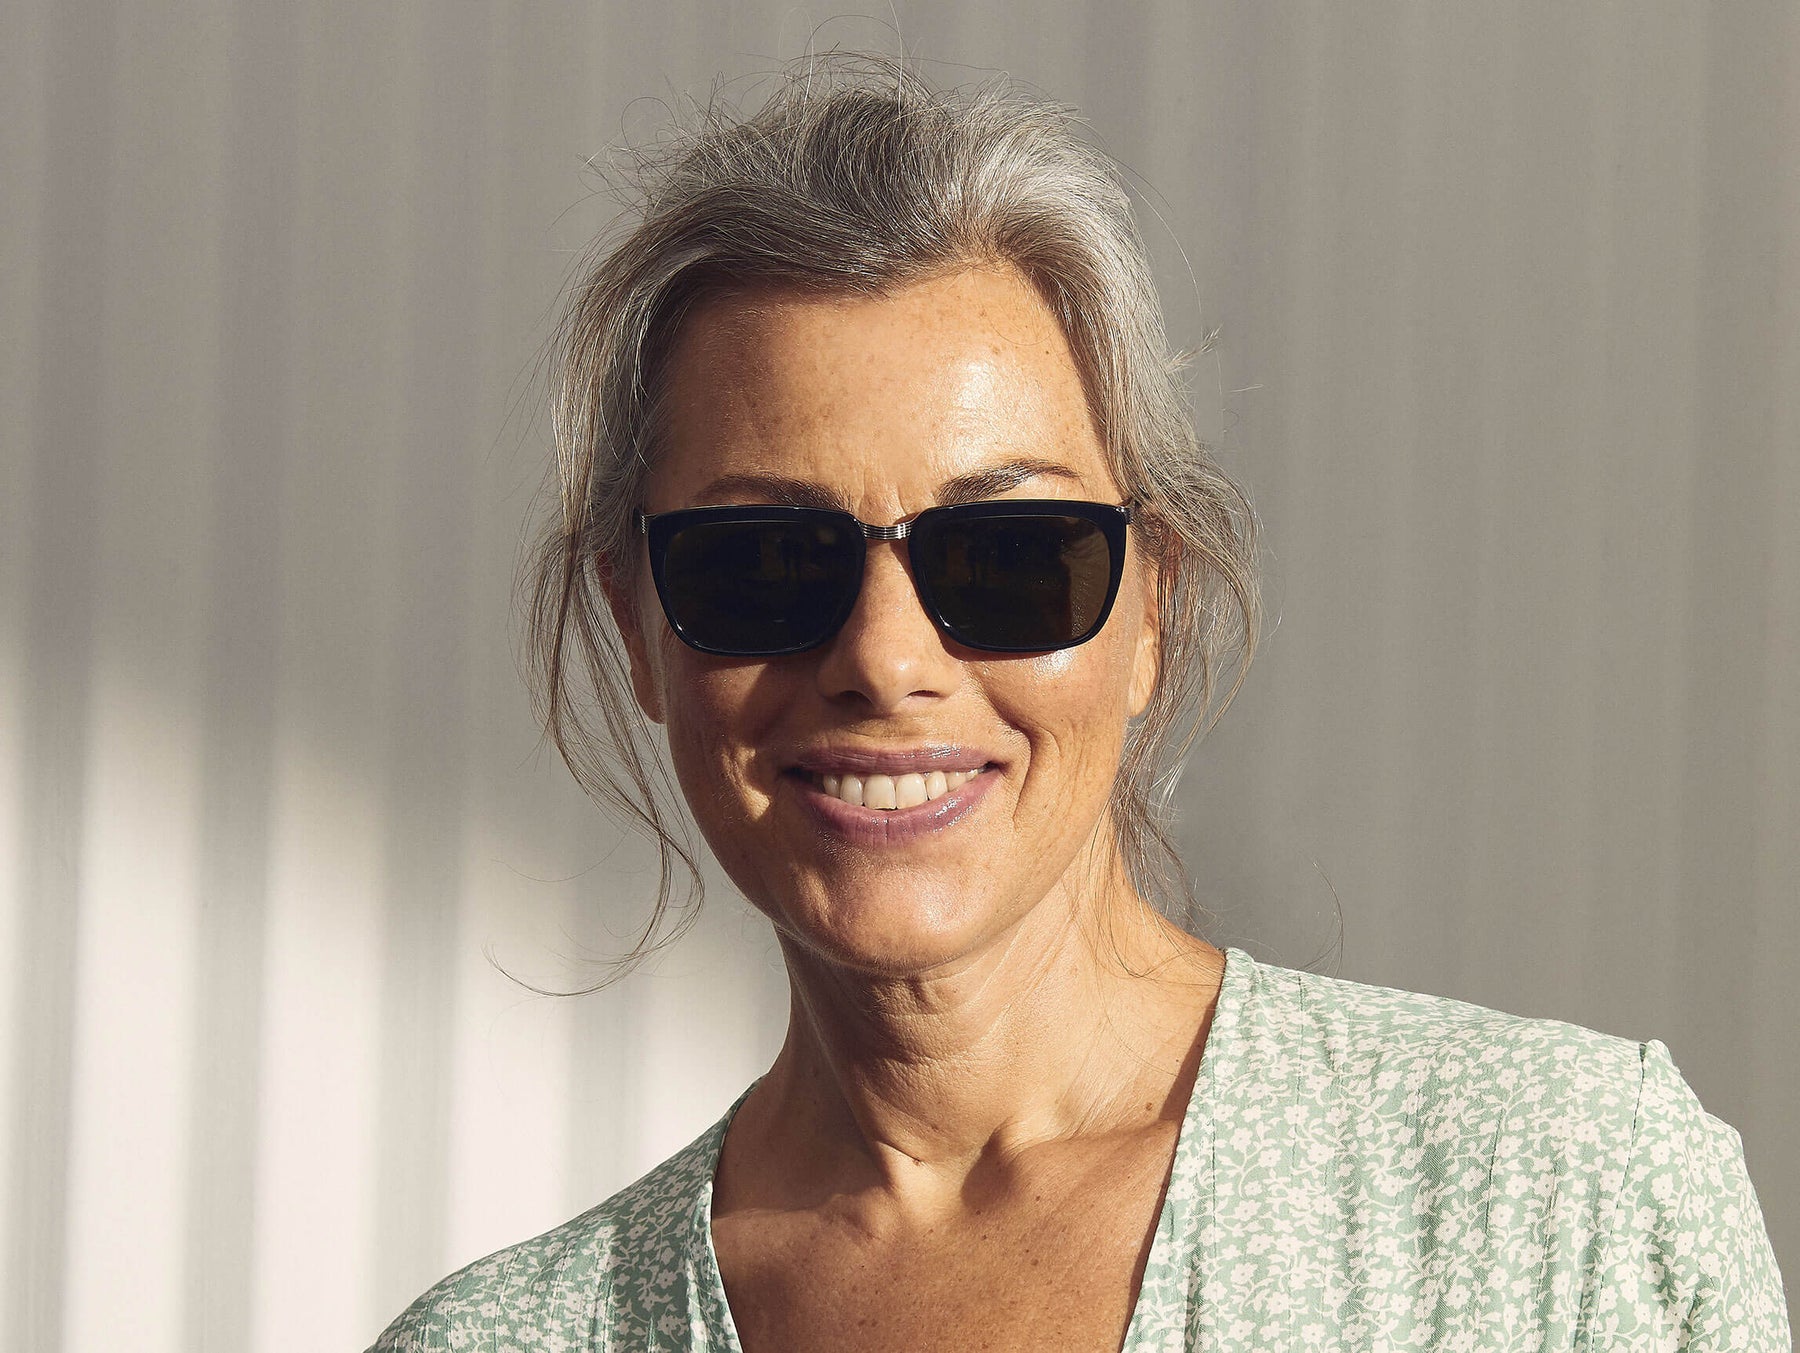 Model is wearing The KLUG SUN in Black/Silver in size 52 with G-15 Glass Lenses